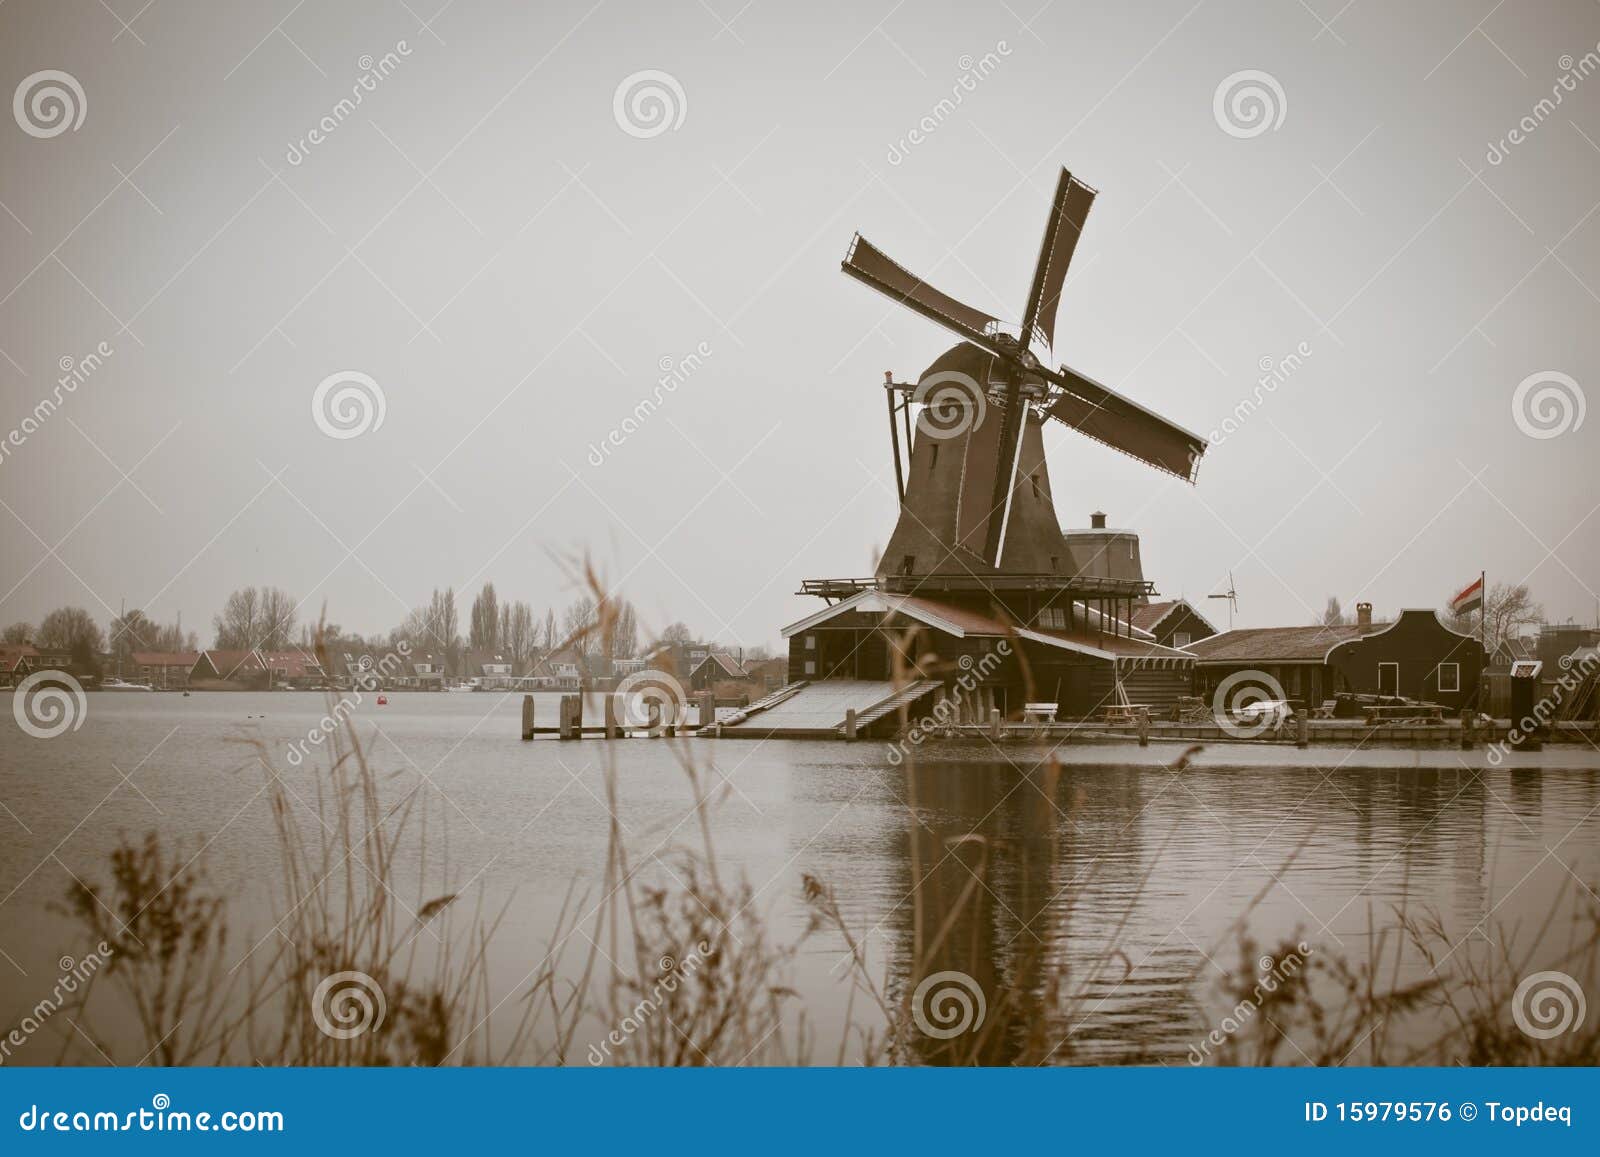 Sepia Toned Image Of Windmill In Zaanse Schans Royalty Free Stock 